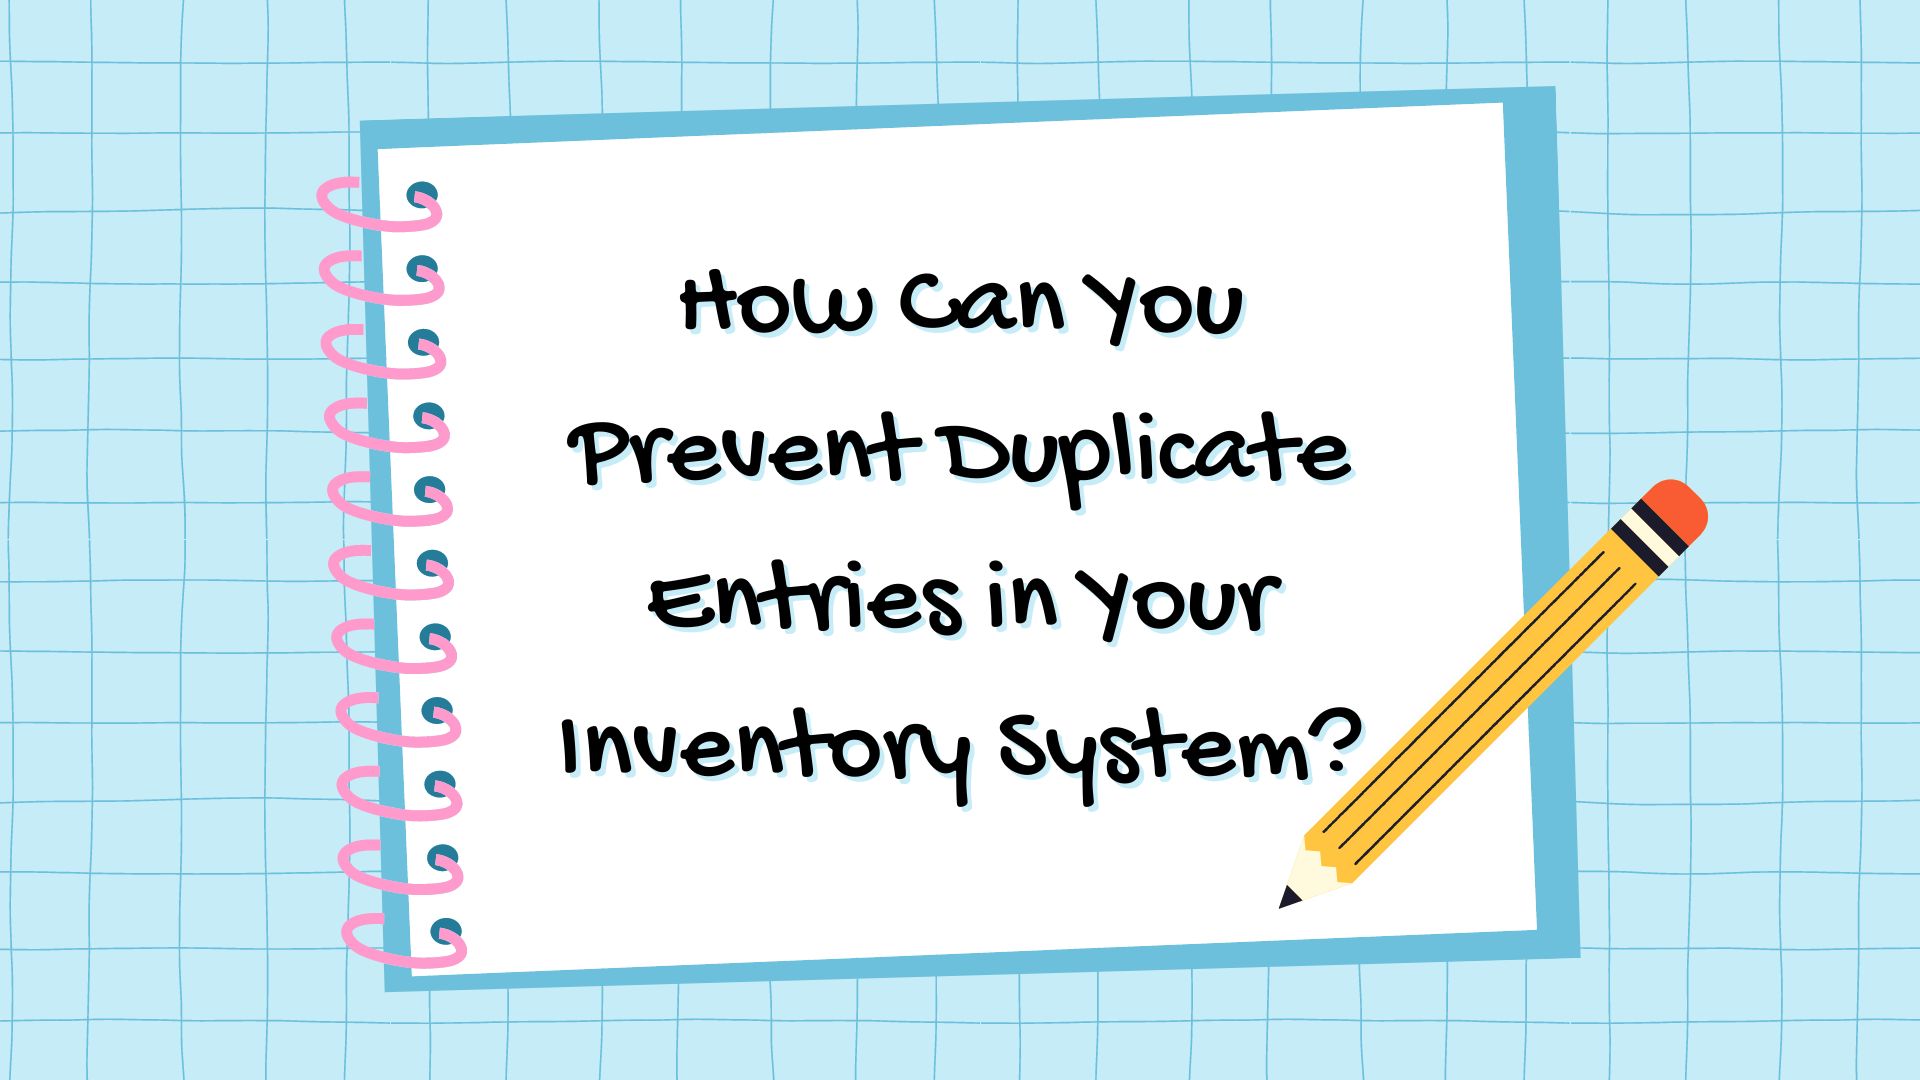 How Can You Prevent Duplicate Entries in Your Inventory System?